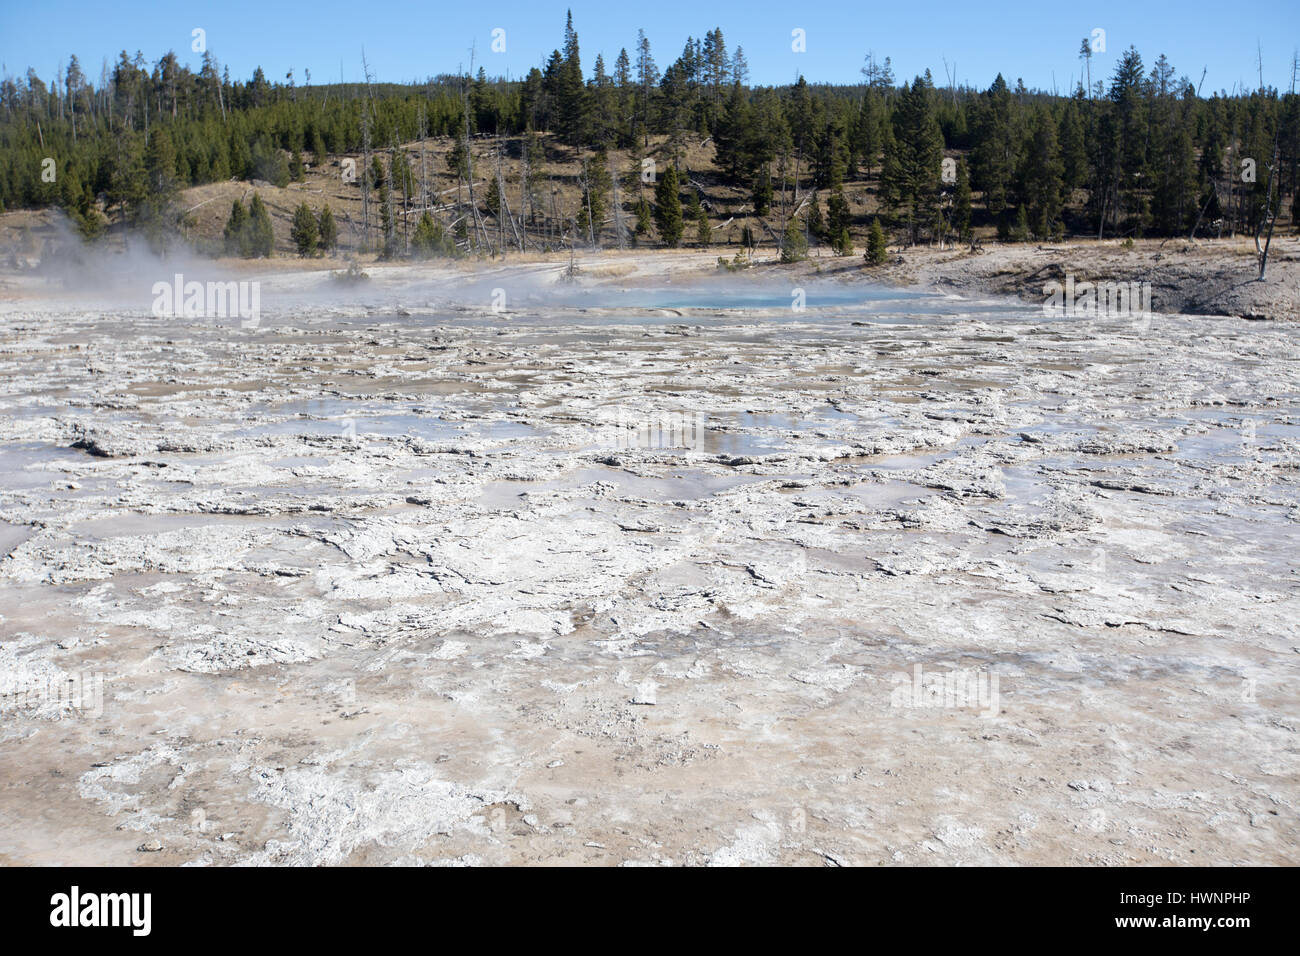 The Oblong Geyser in the Upper Geyser Basin at Yellowstone National Park October 12, 2015 in Yellowstone, Wyoming. Stock Photo